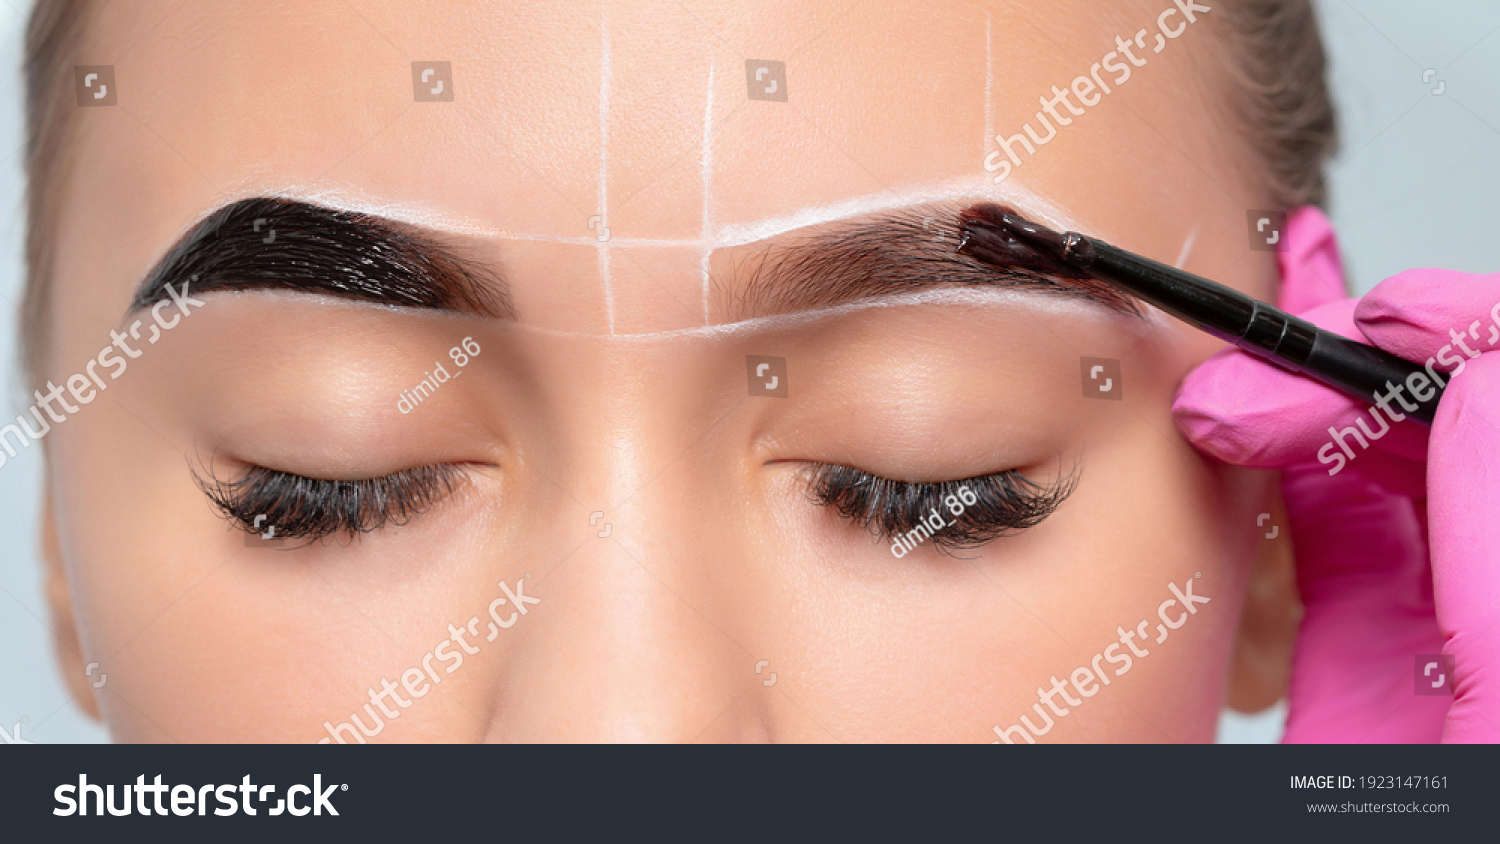 Make-up artist makes markings with white pencil for eyebrow and paints eyebrows. Professional makeup and facial care. #1923147161